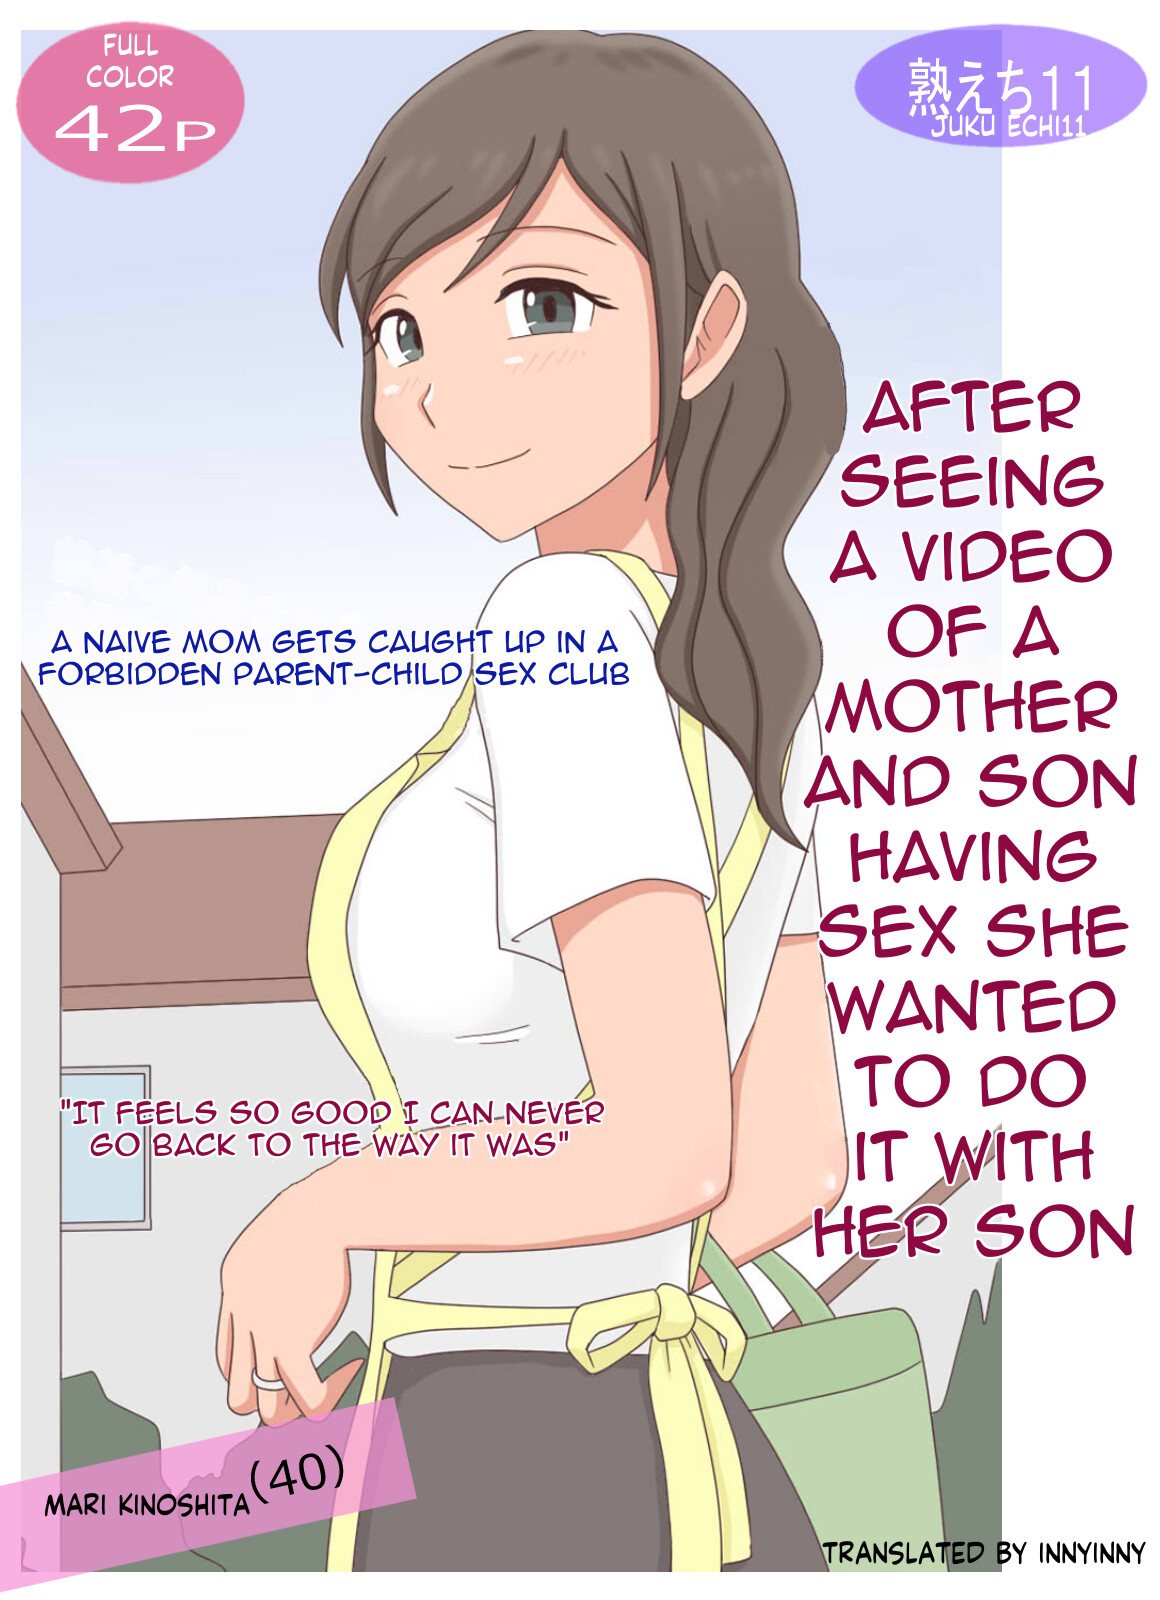 Juku Echi Land After seeing a mom-son sex vid she wants to do her son 